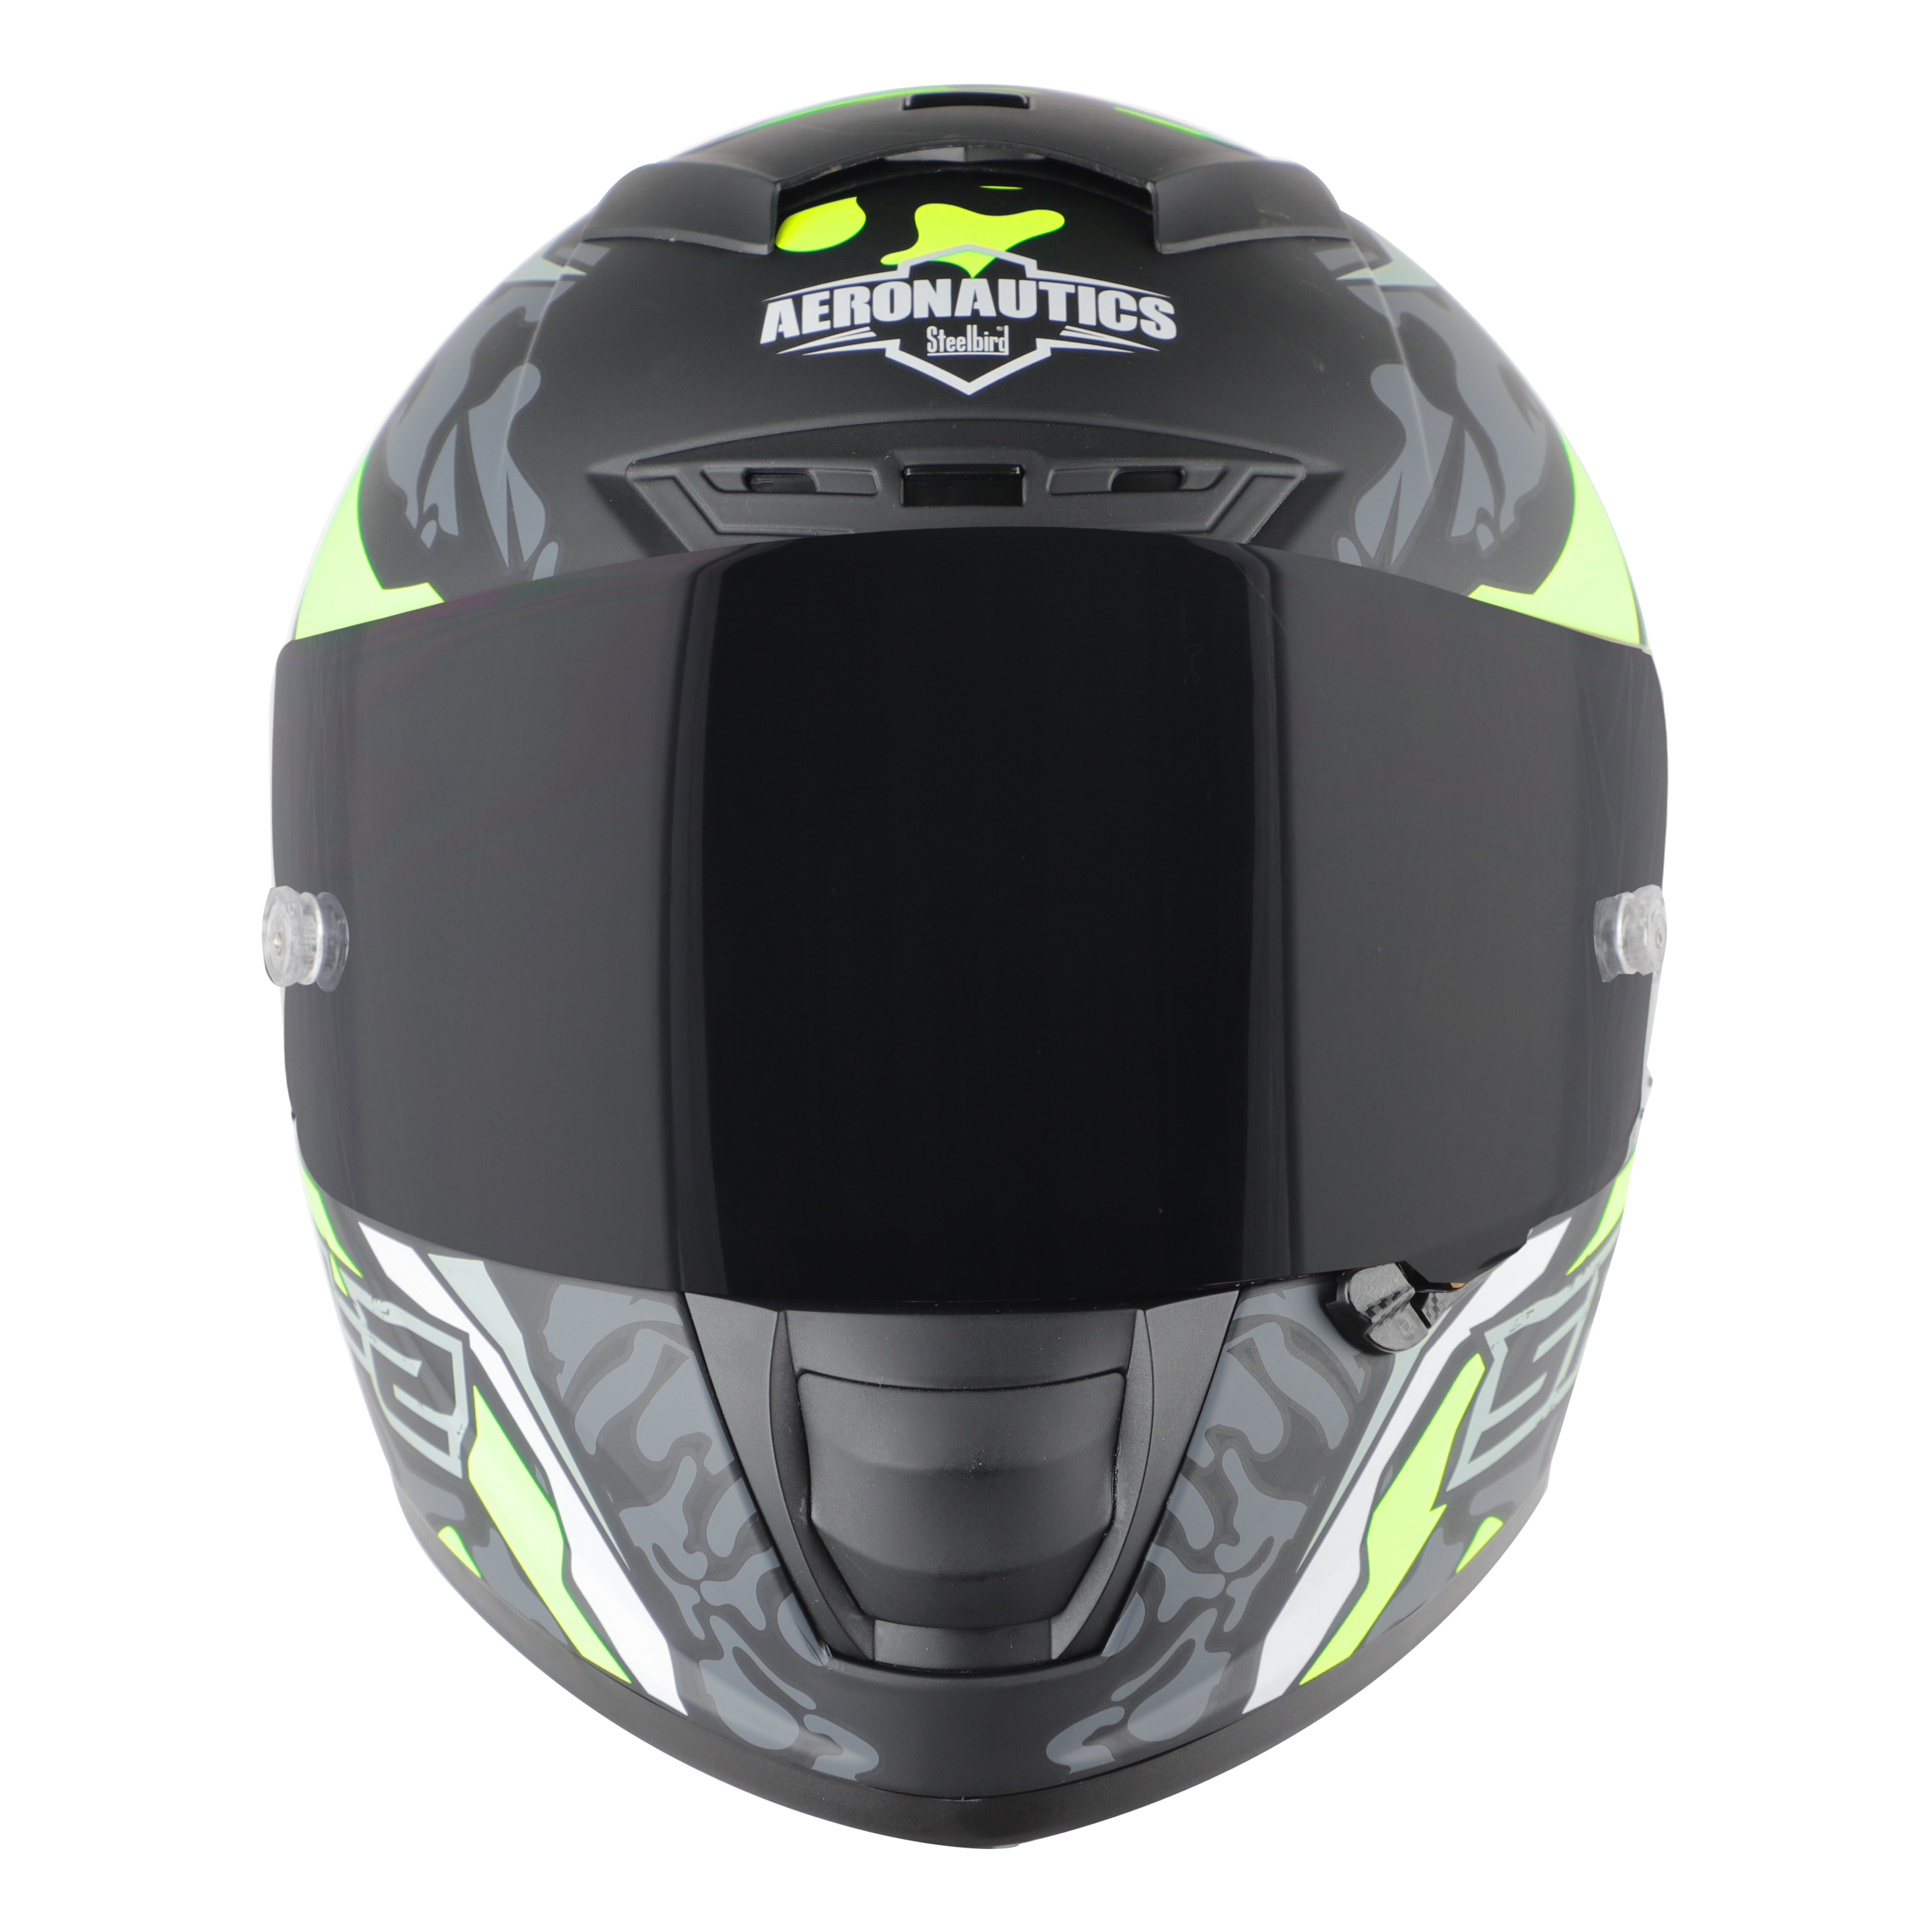 SA-2 TERMINATOR 3.0 GLOSSY BLACK WITH NEON FITTED WITH CLEAR VISOR EXTRA SMOKE VISOR FREE (WITH ANTI-FOR SHIELD HOLDER)